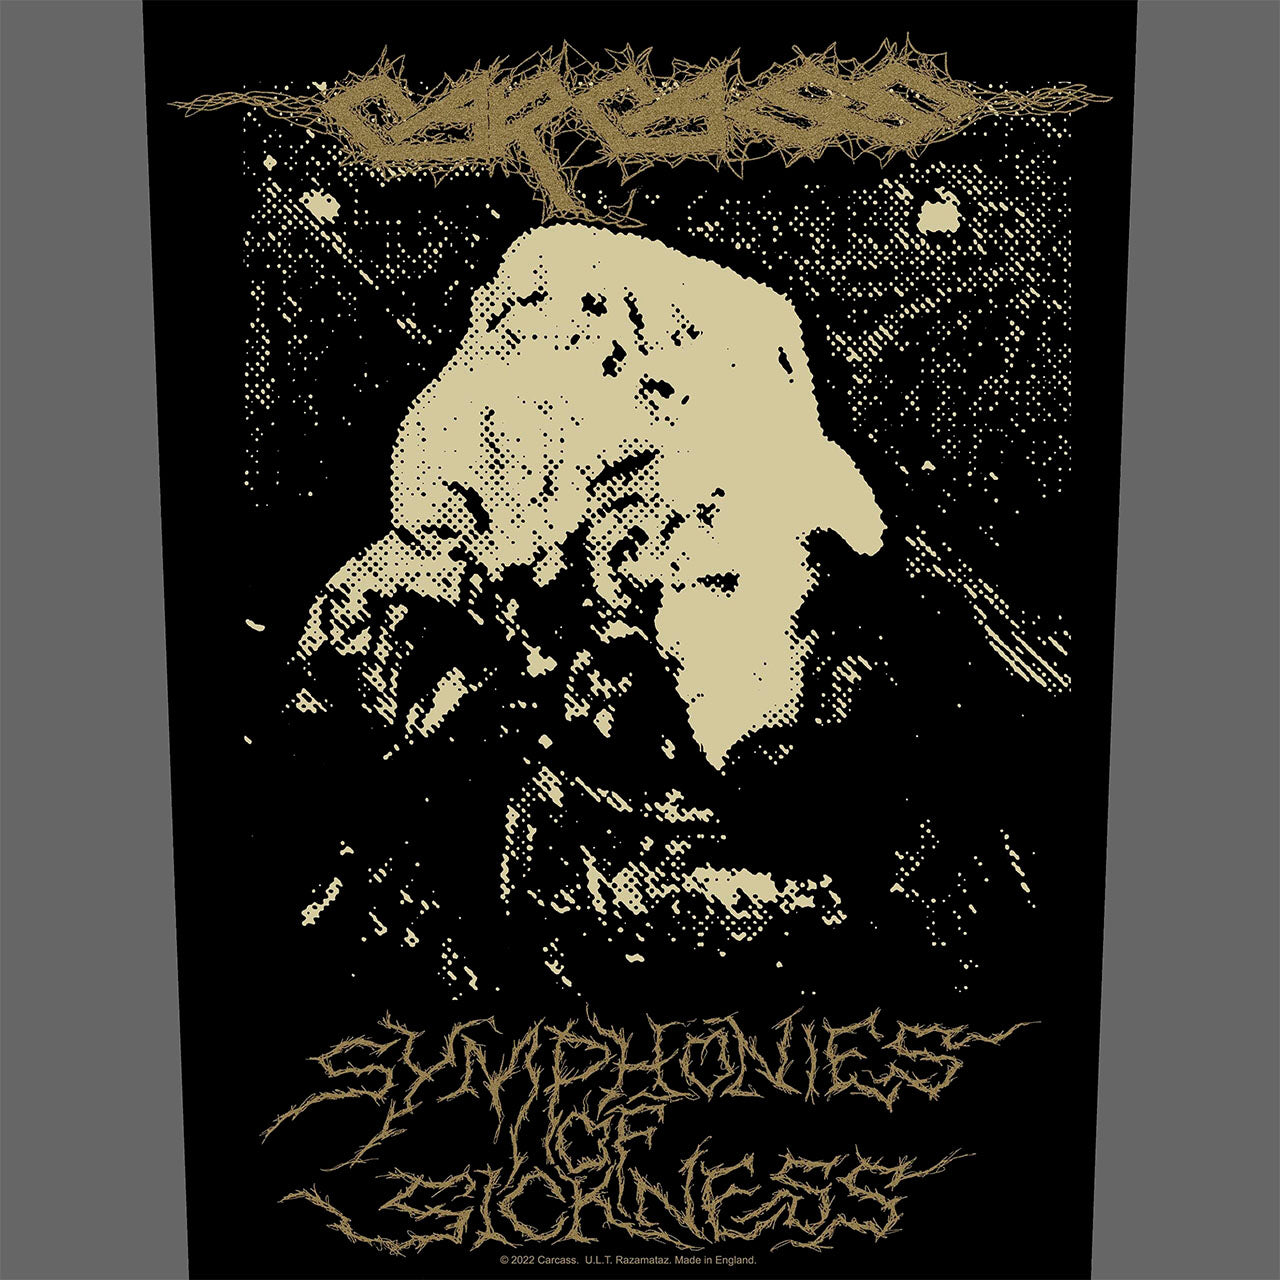 Carcass - Symphonies of Sickness (Backpatch)